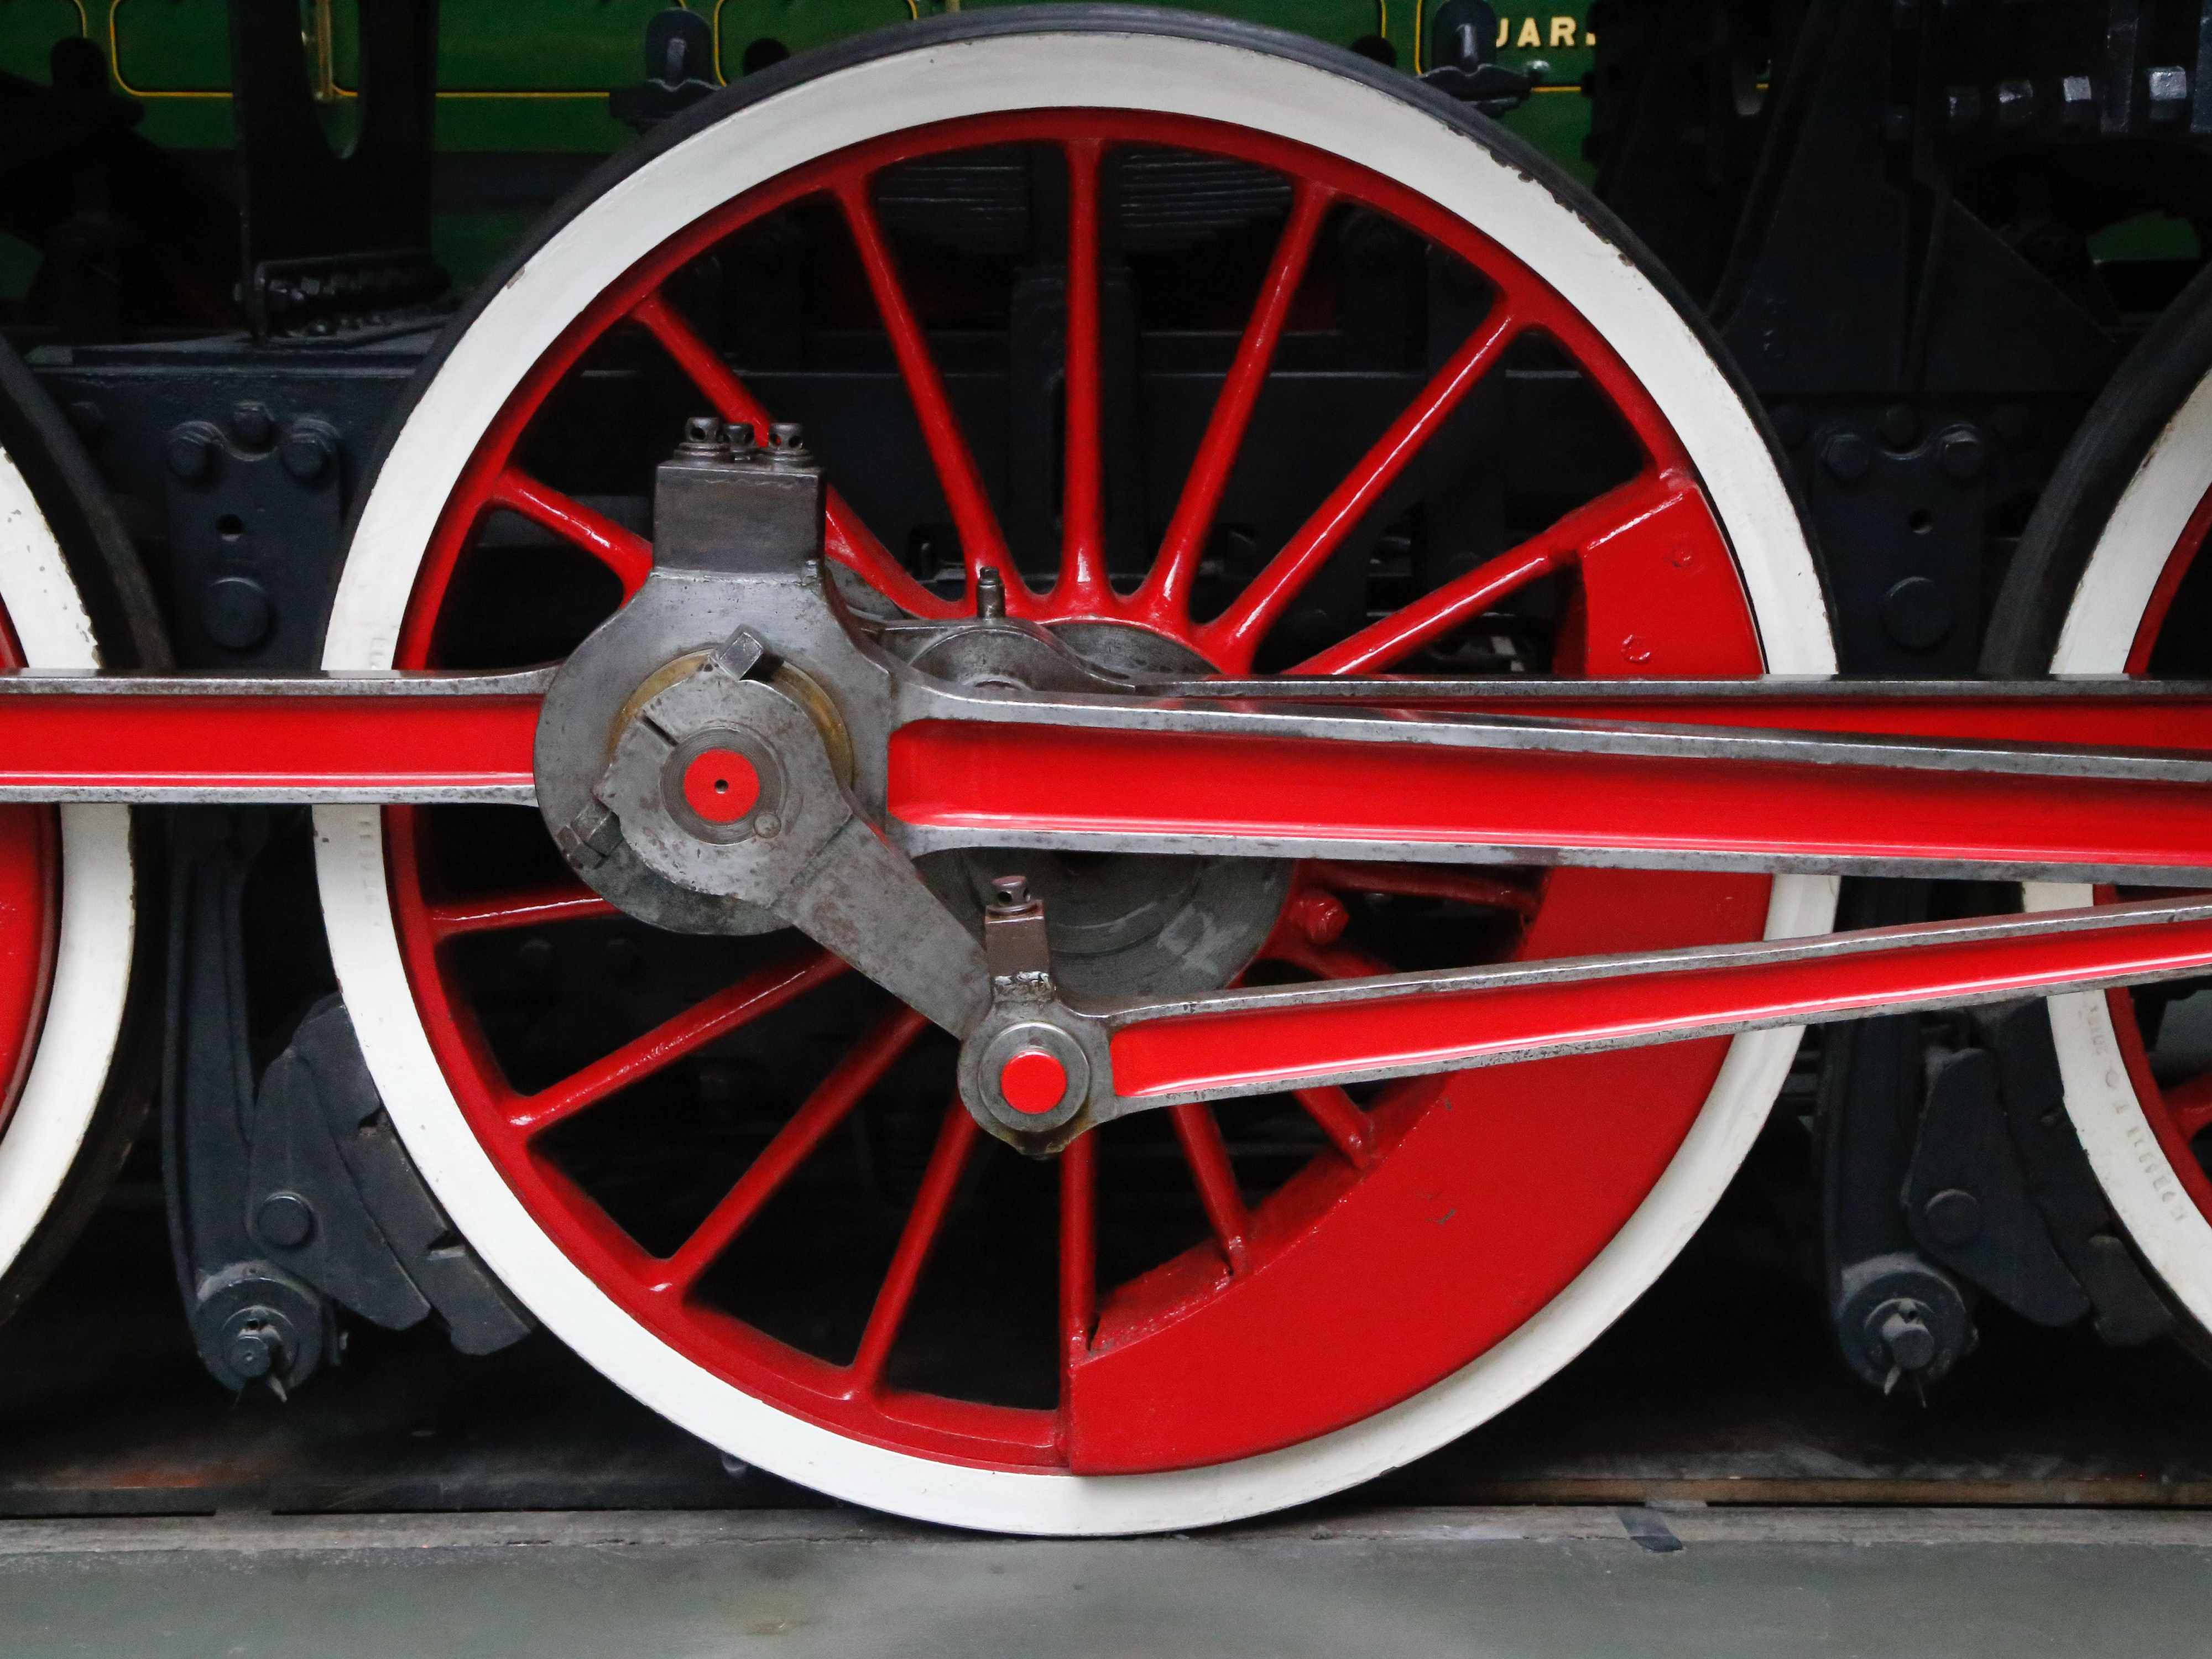 Let off some steam at the National Railway Museum 